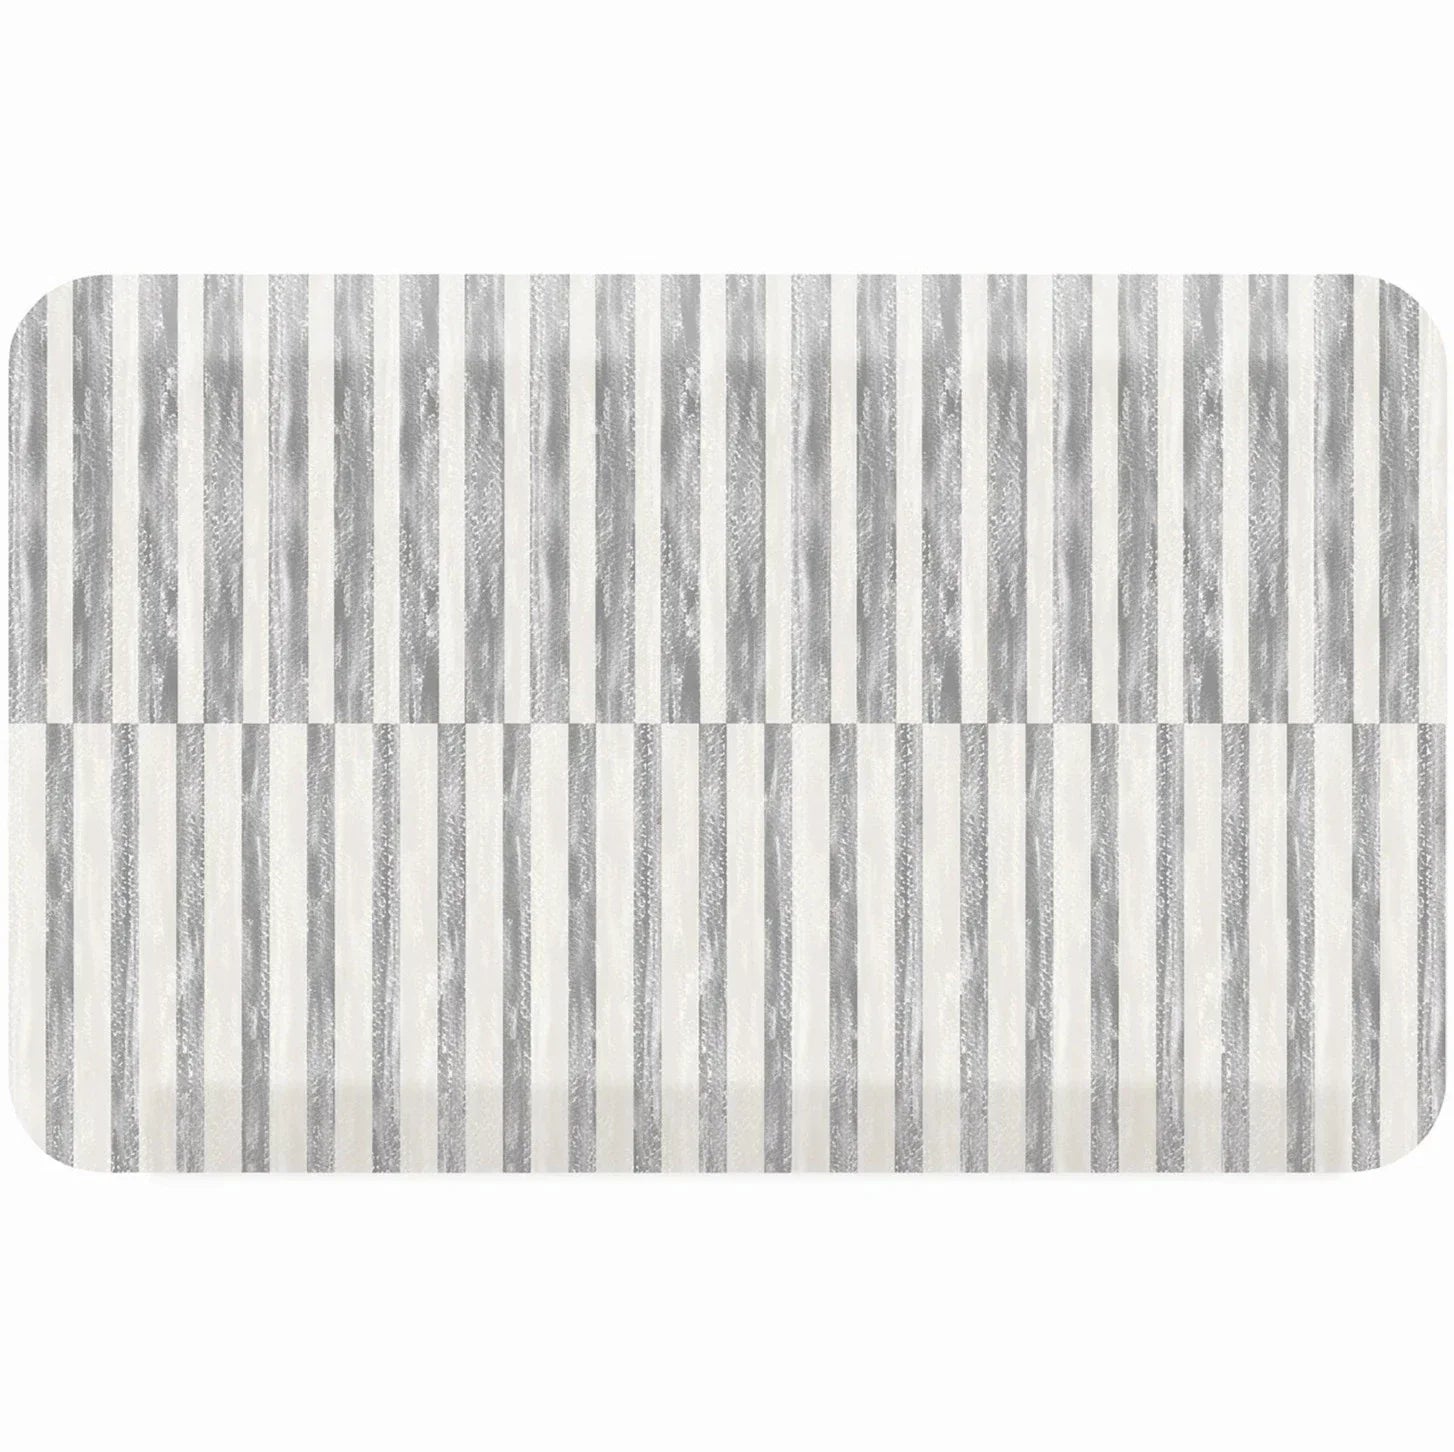 Reese pewter gray and white inverted stripe standing mat shown in size 22x36